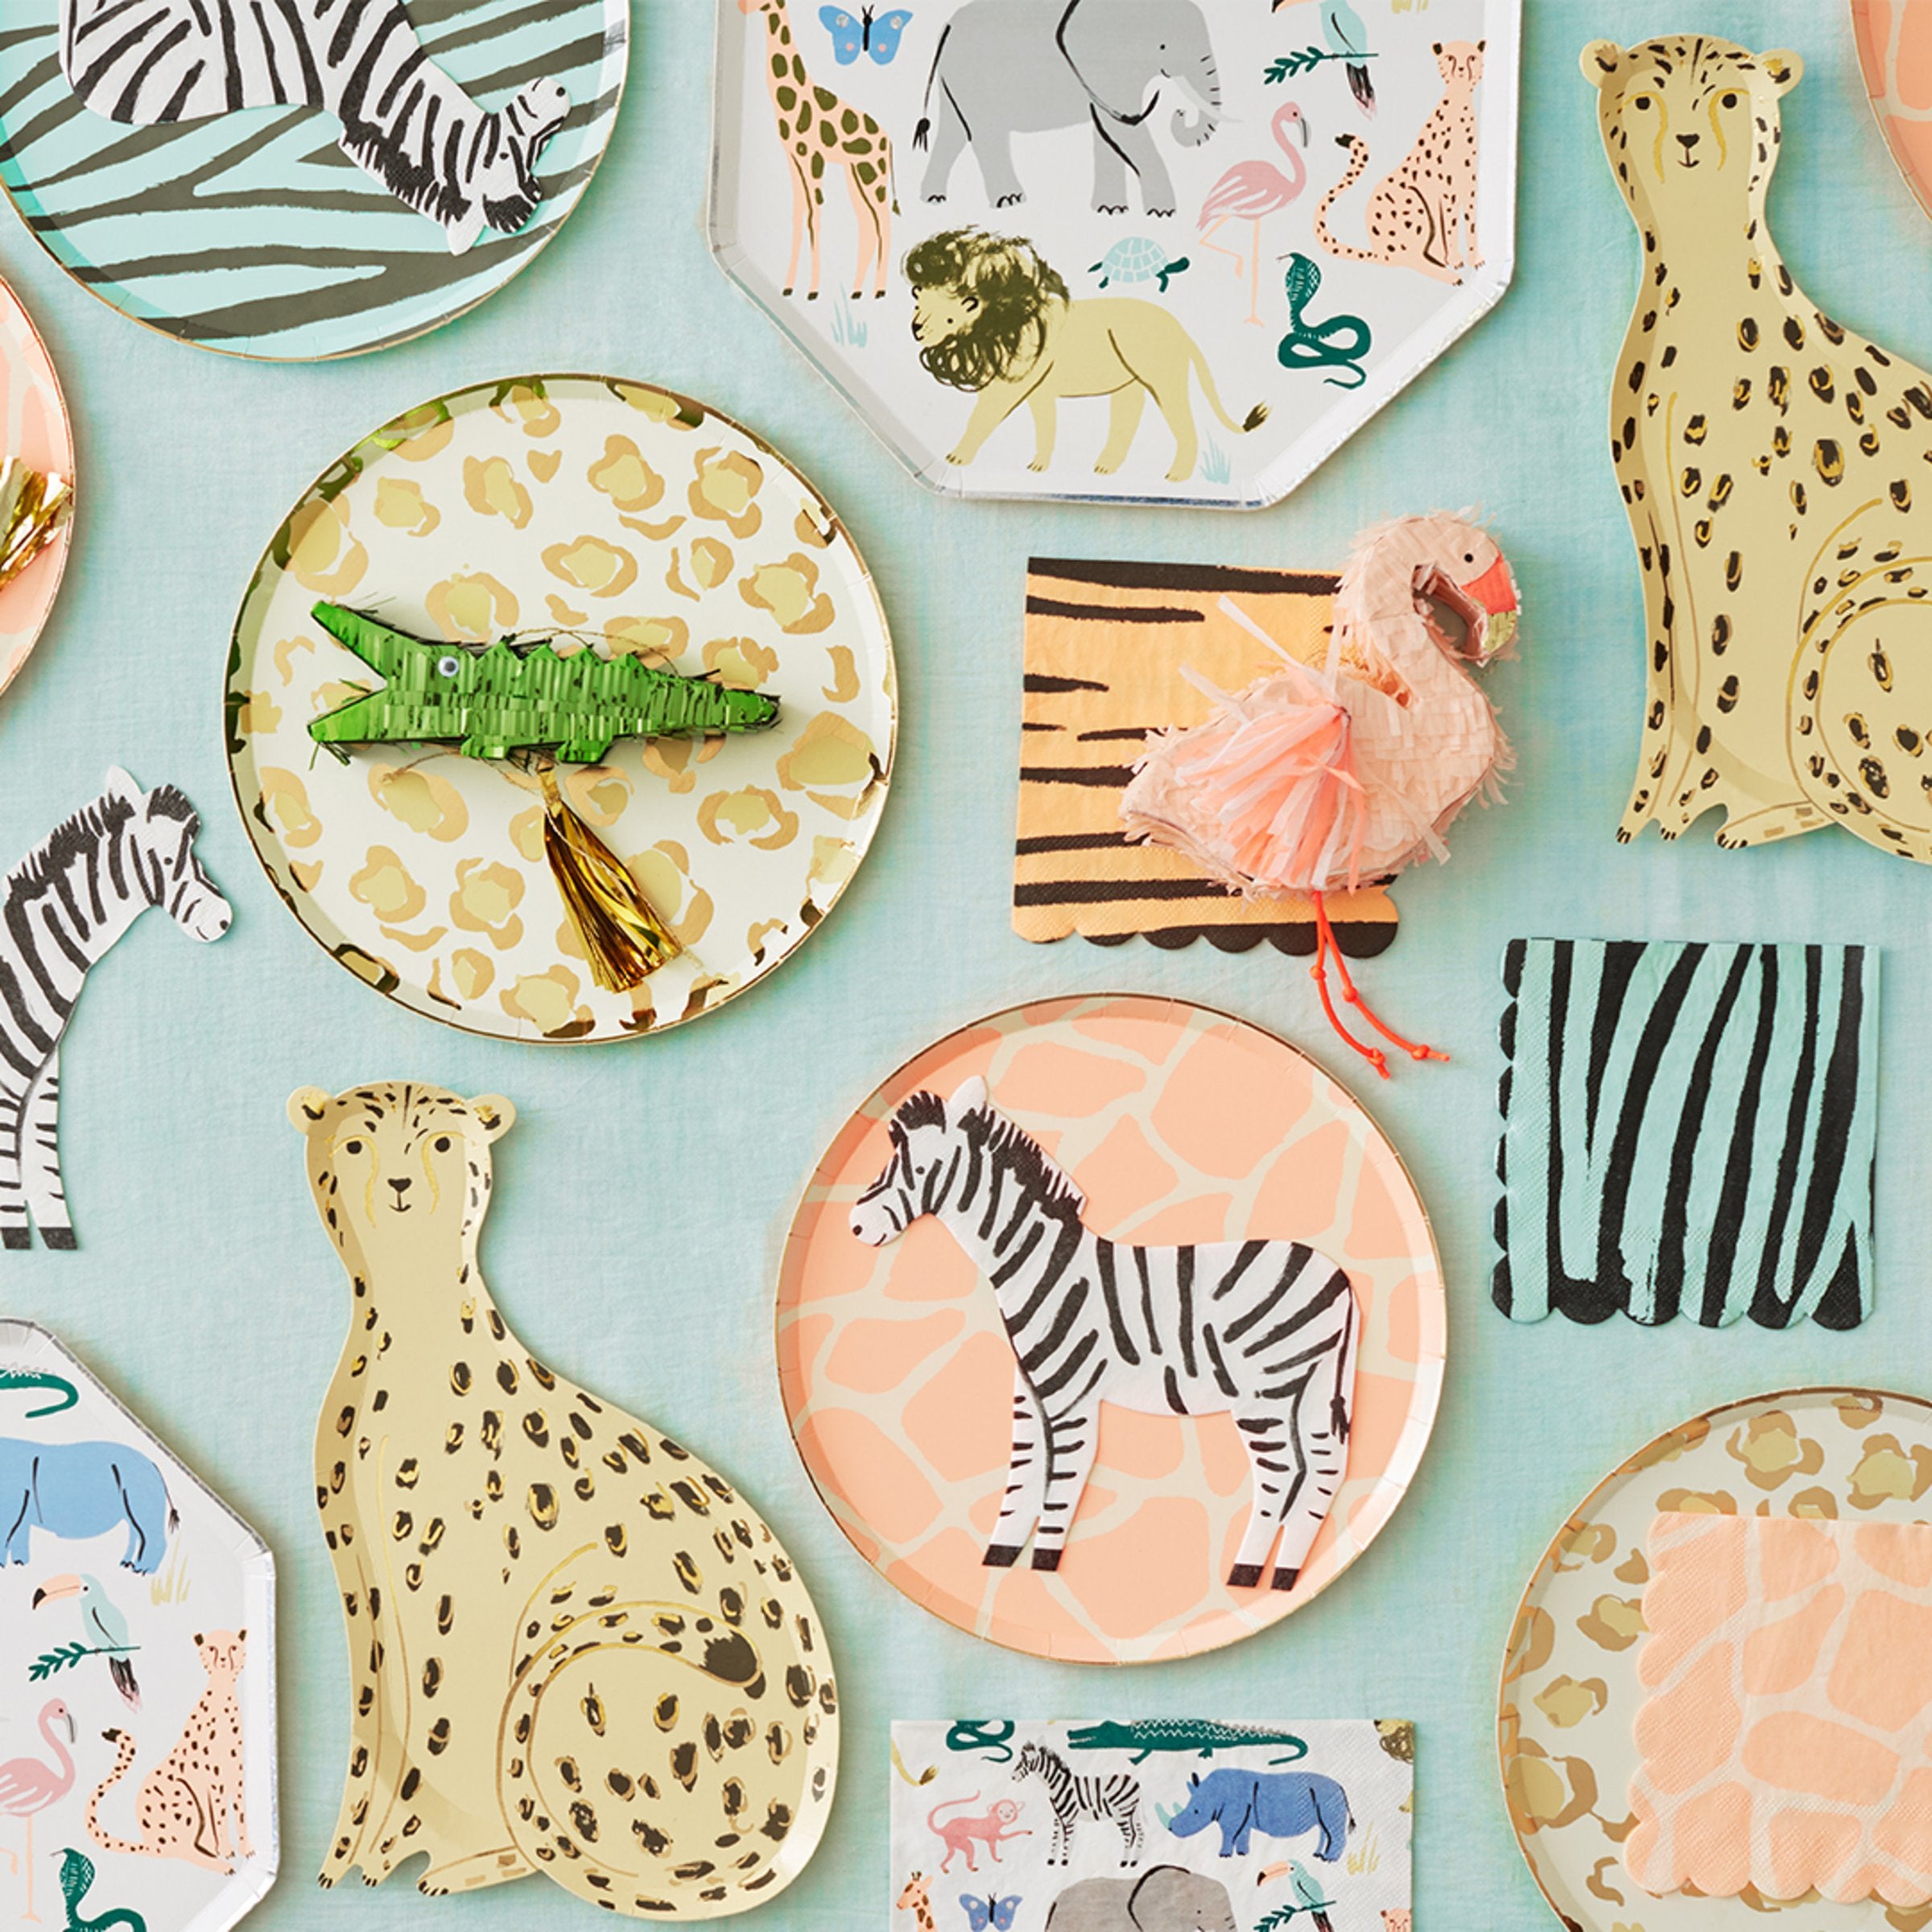 If you're looking for safari party decoration ideas then our zebra napkins are perfect.